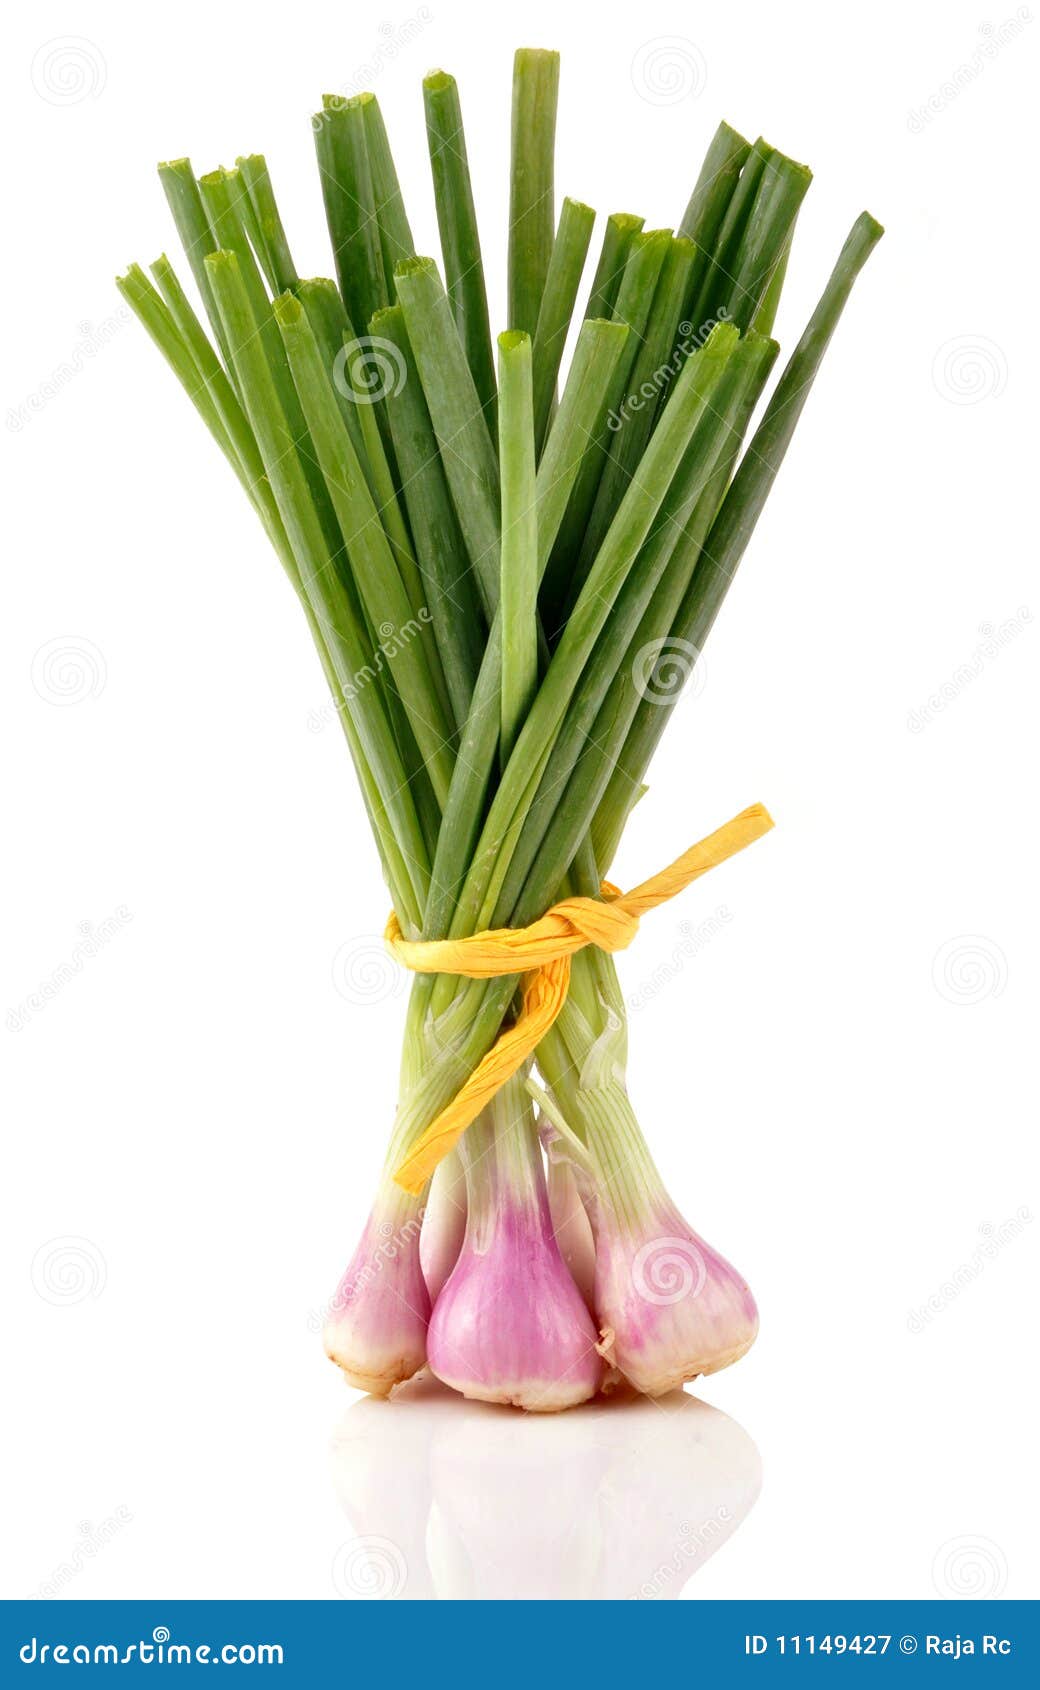 Spring Onion Royalty Free Stock Photography - Image: 11149427